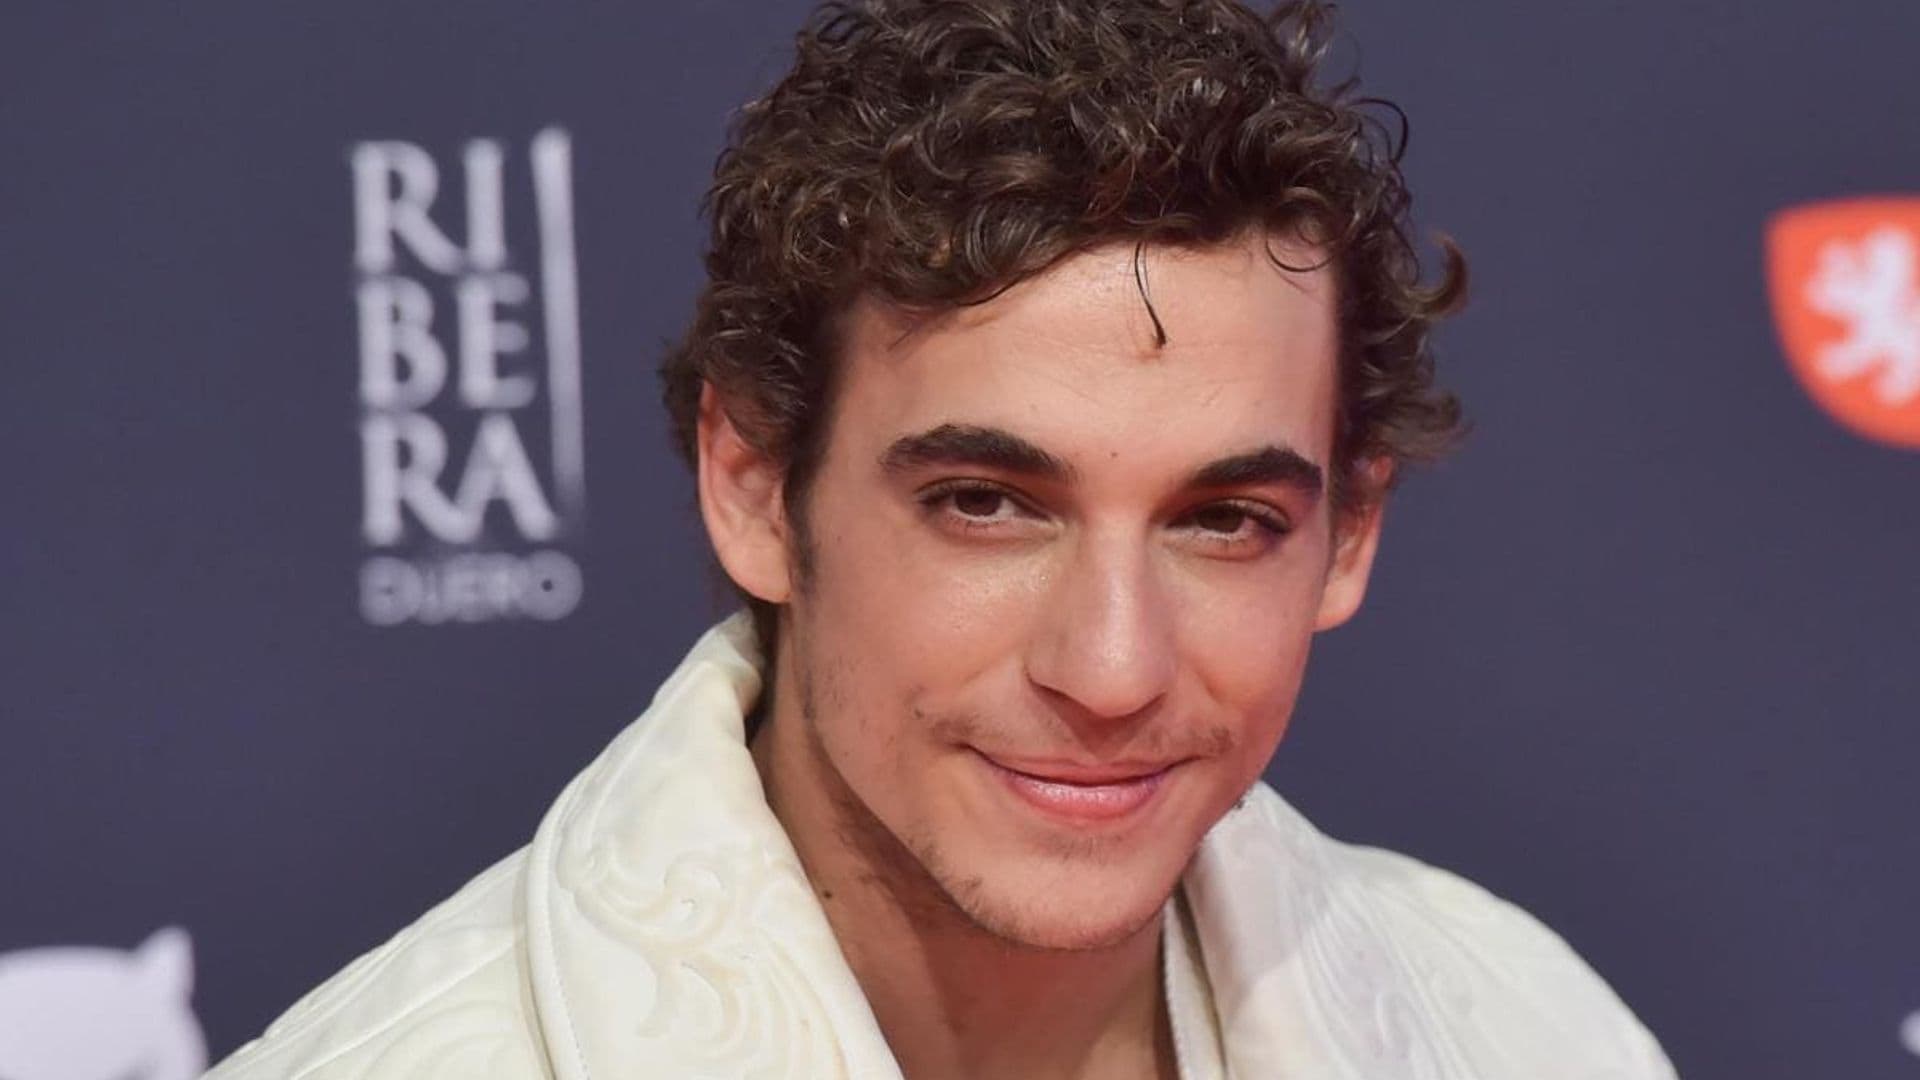 Rio, the actor from ‘Money Heist’, was involved in a motorcycle accident